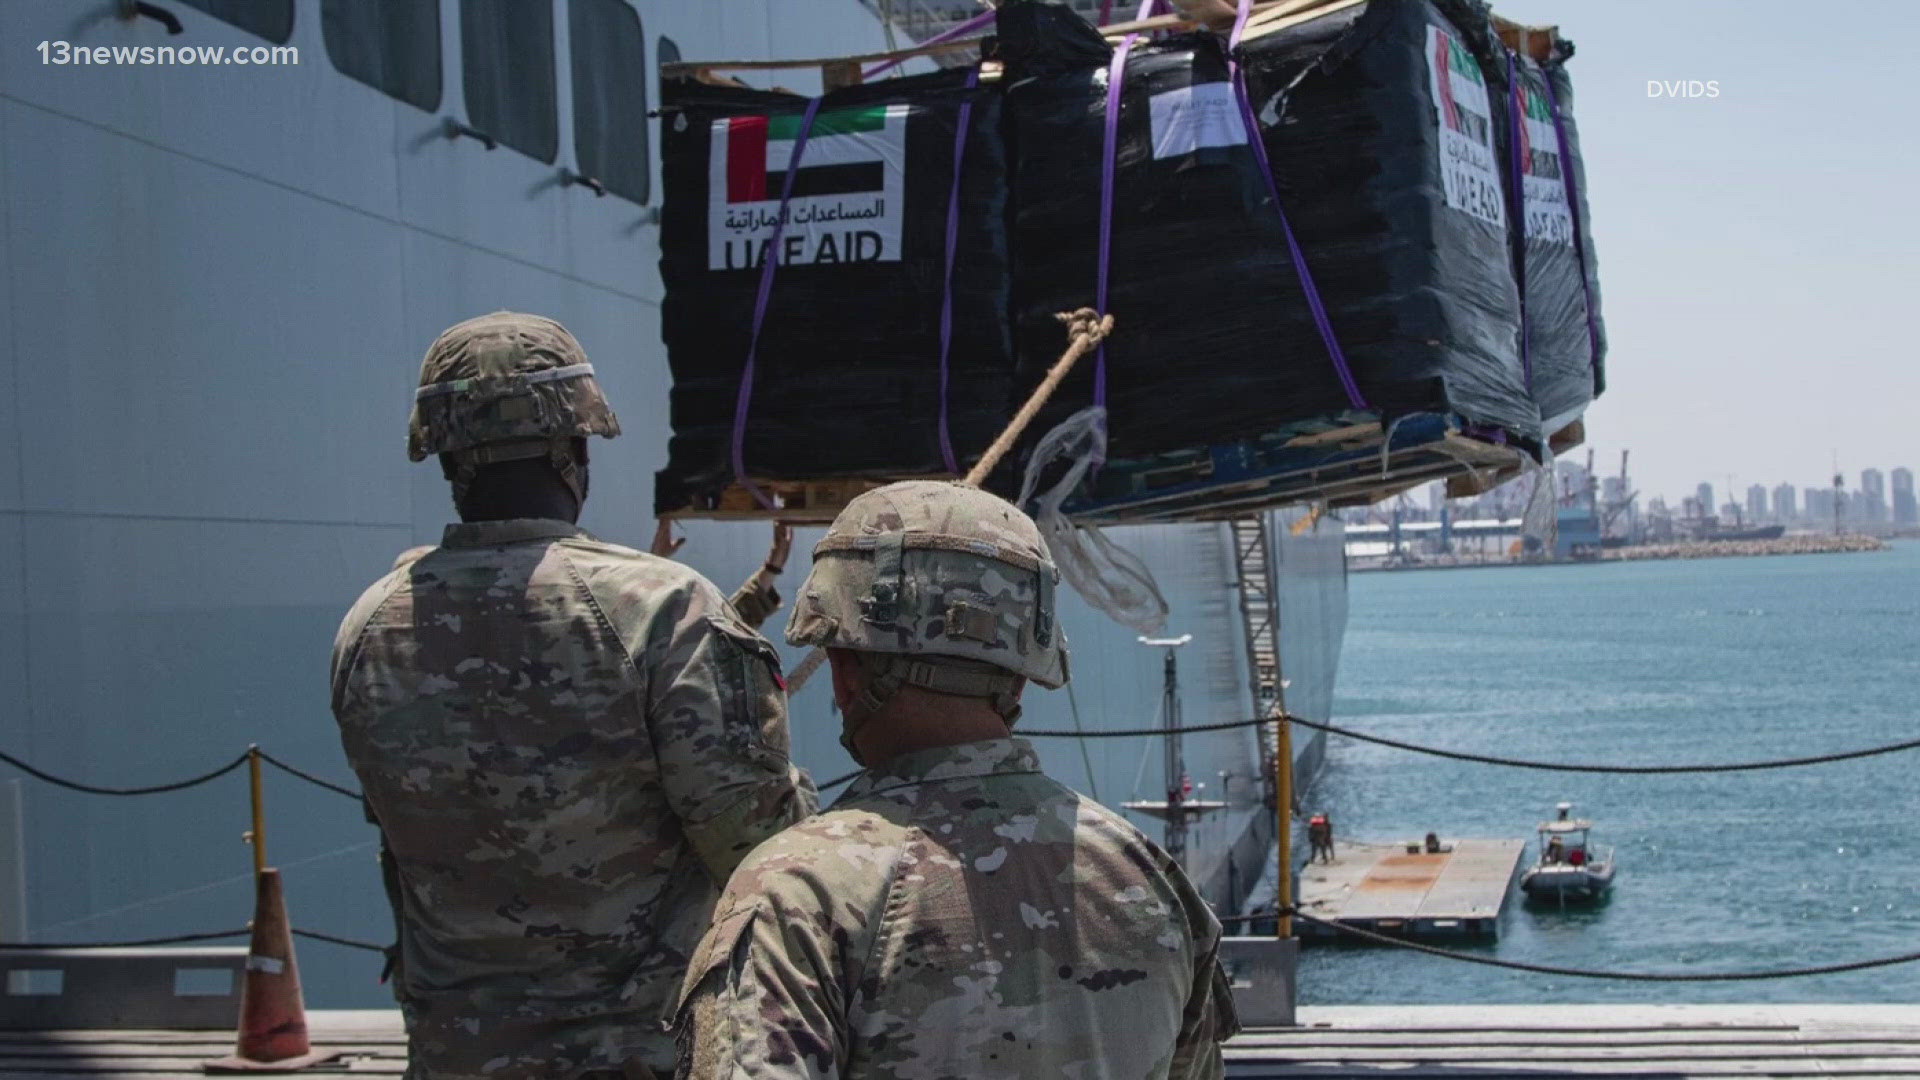 The humanitarian aid bridge built by Fort Eustis soldiers is now complete and anchored on the Gaza Strip.